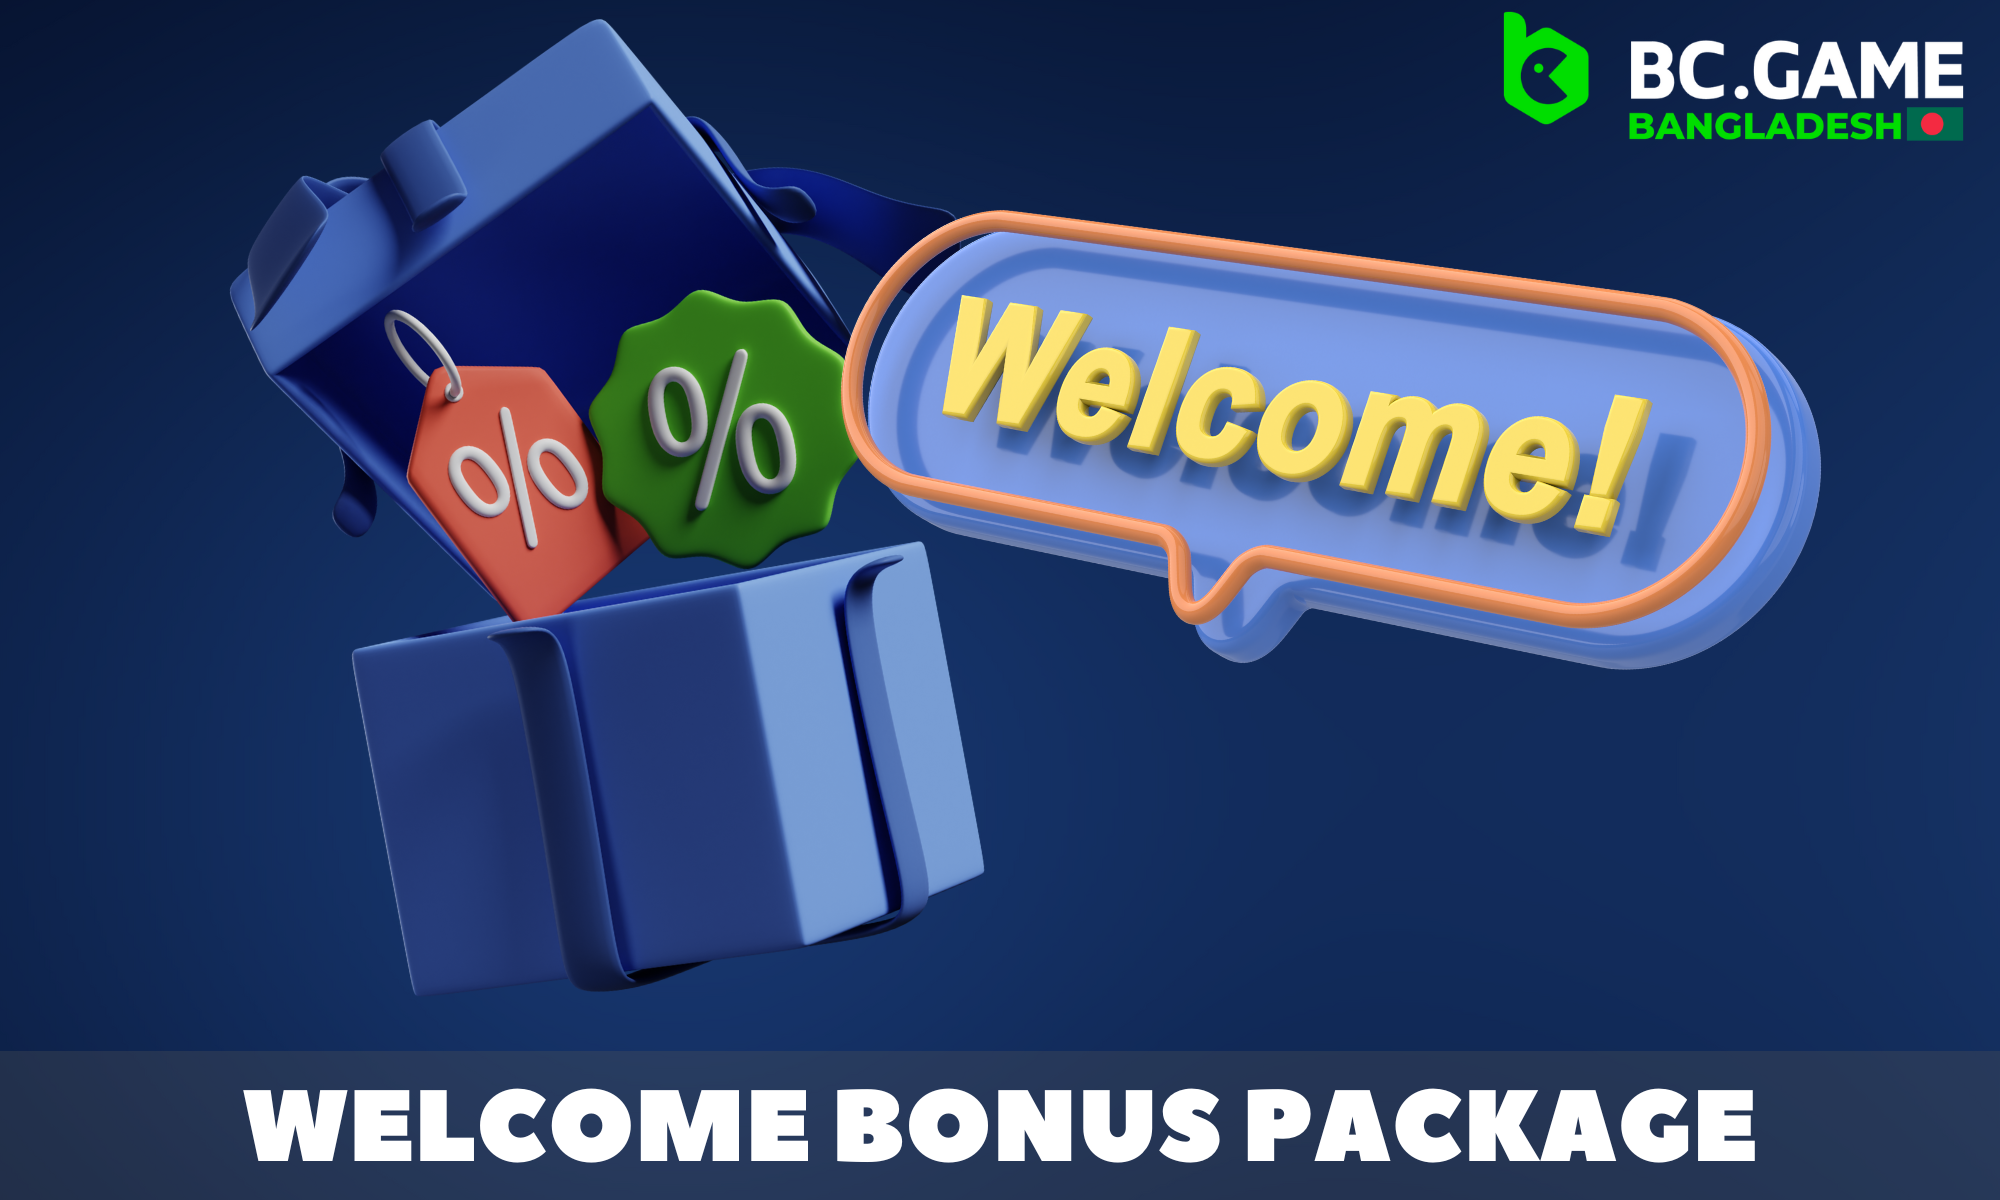 A welcome bonus is available for all new BC Game players